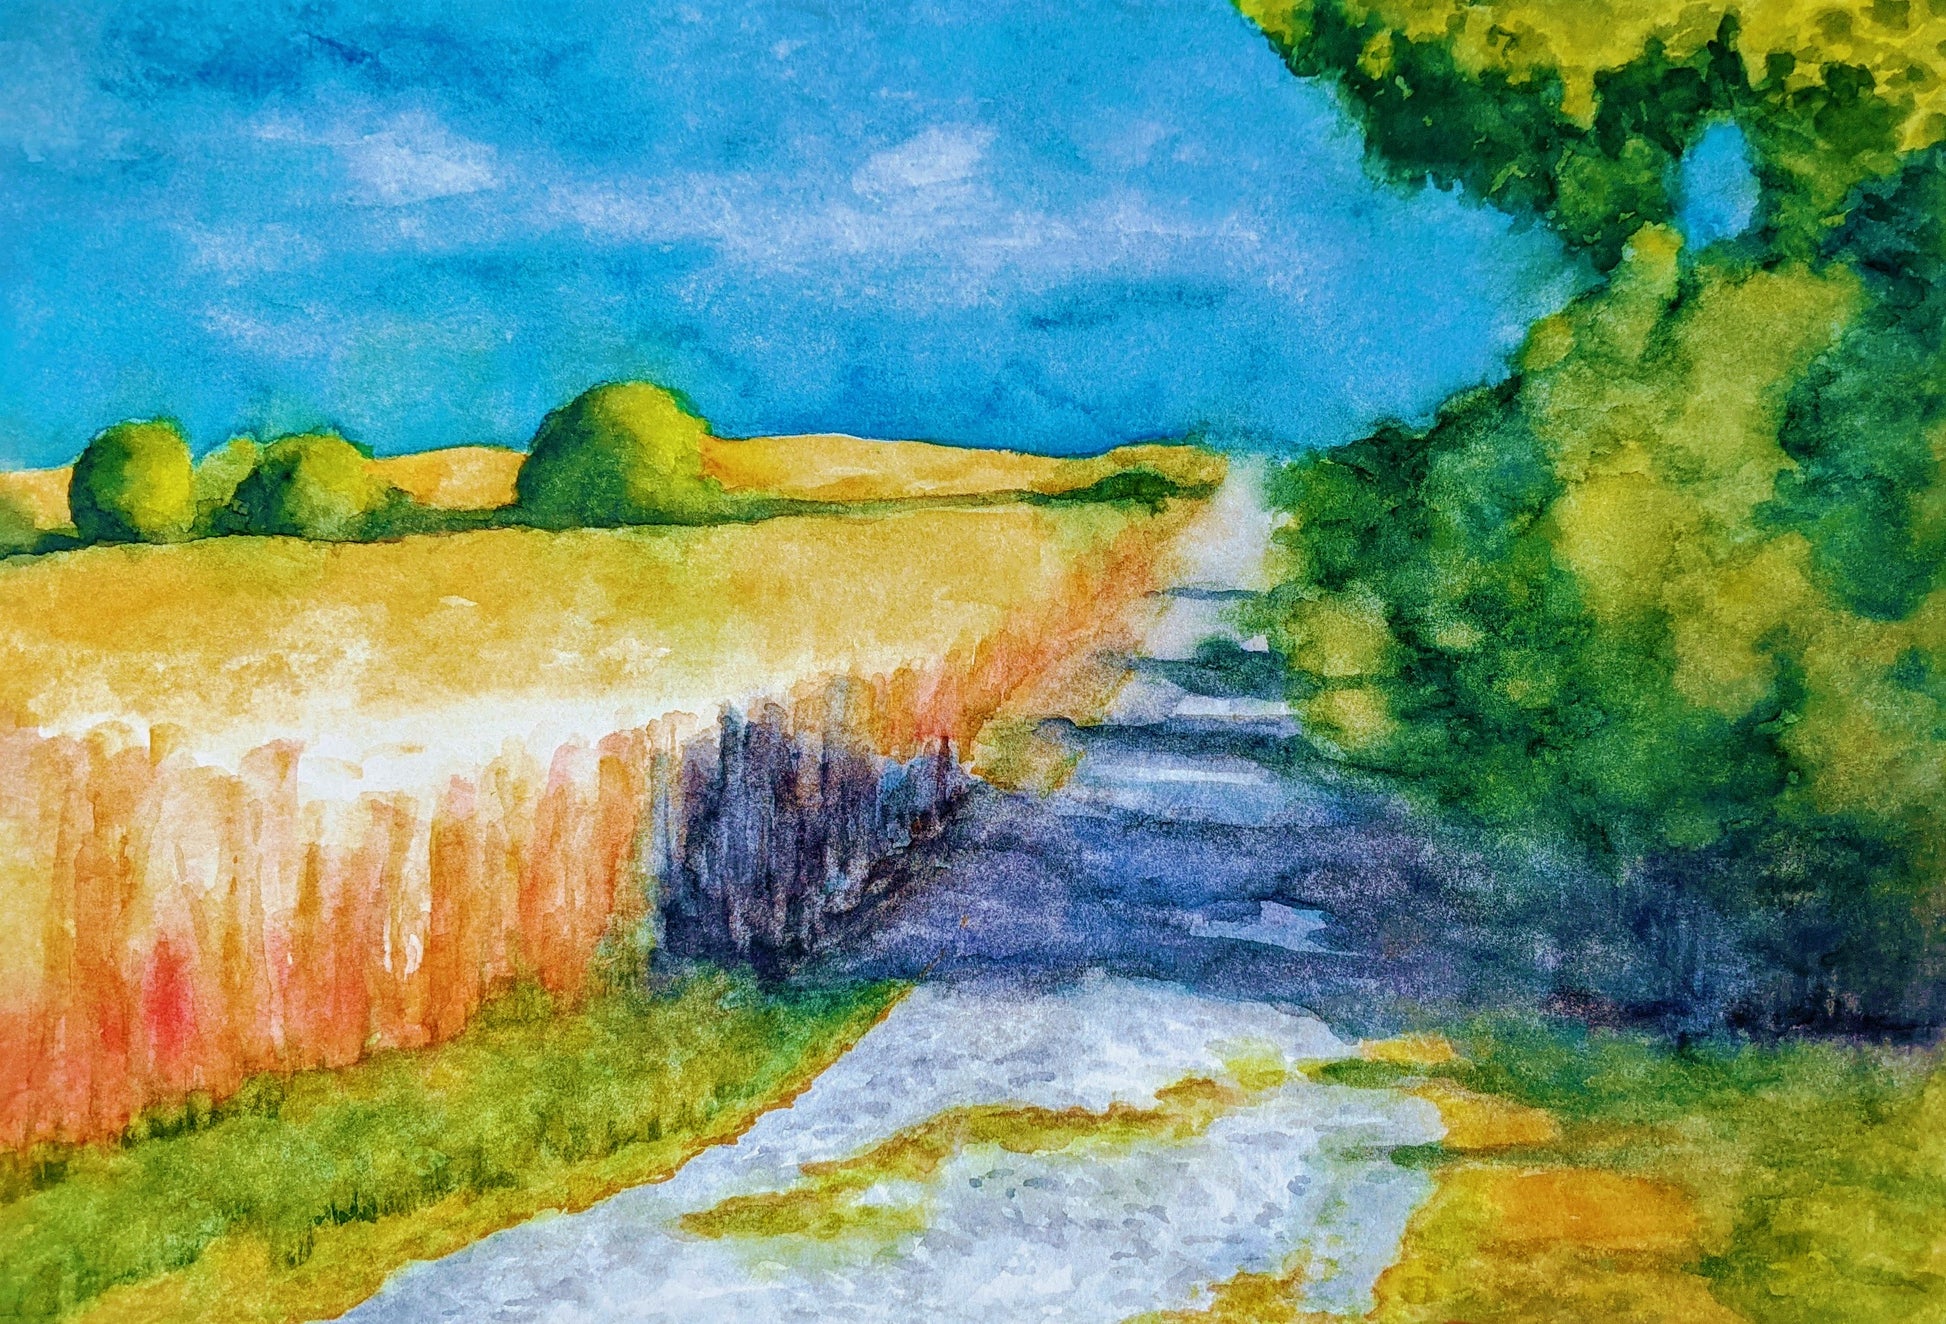 Sun & Shadows on the Plains, watercolor painting on paper